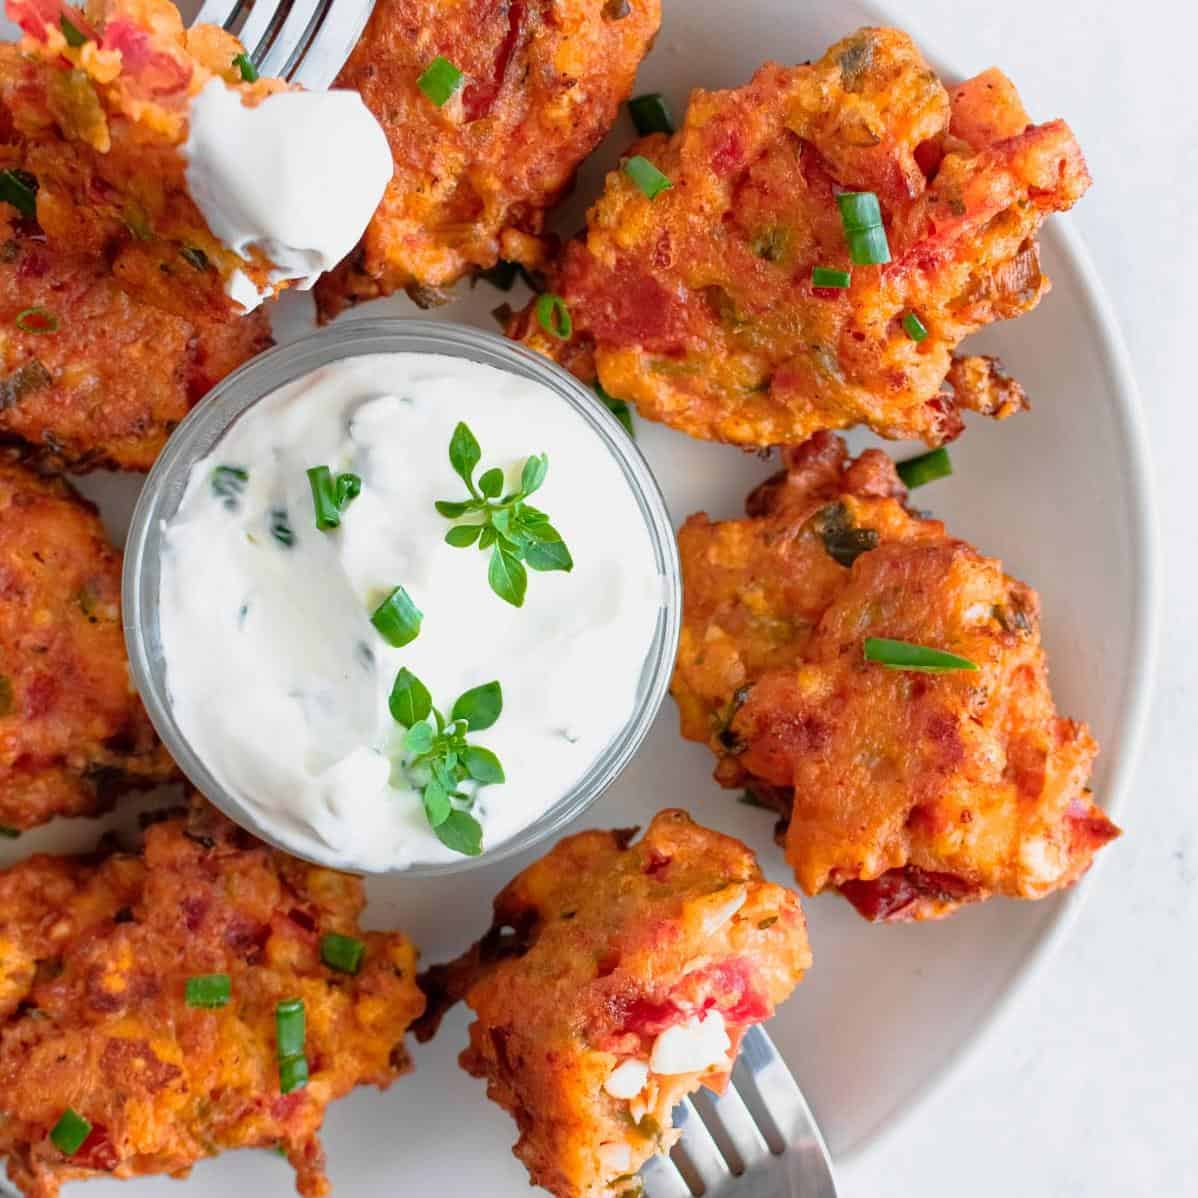  These fritters are crispy on the outside and bursting with juicy tomato flavor on the inside.